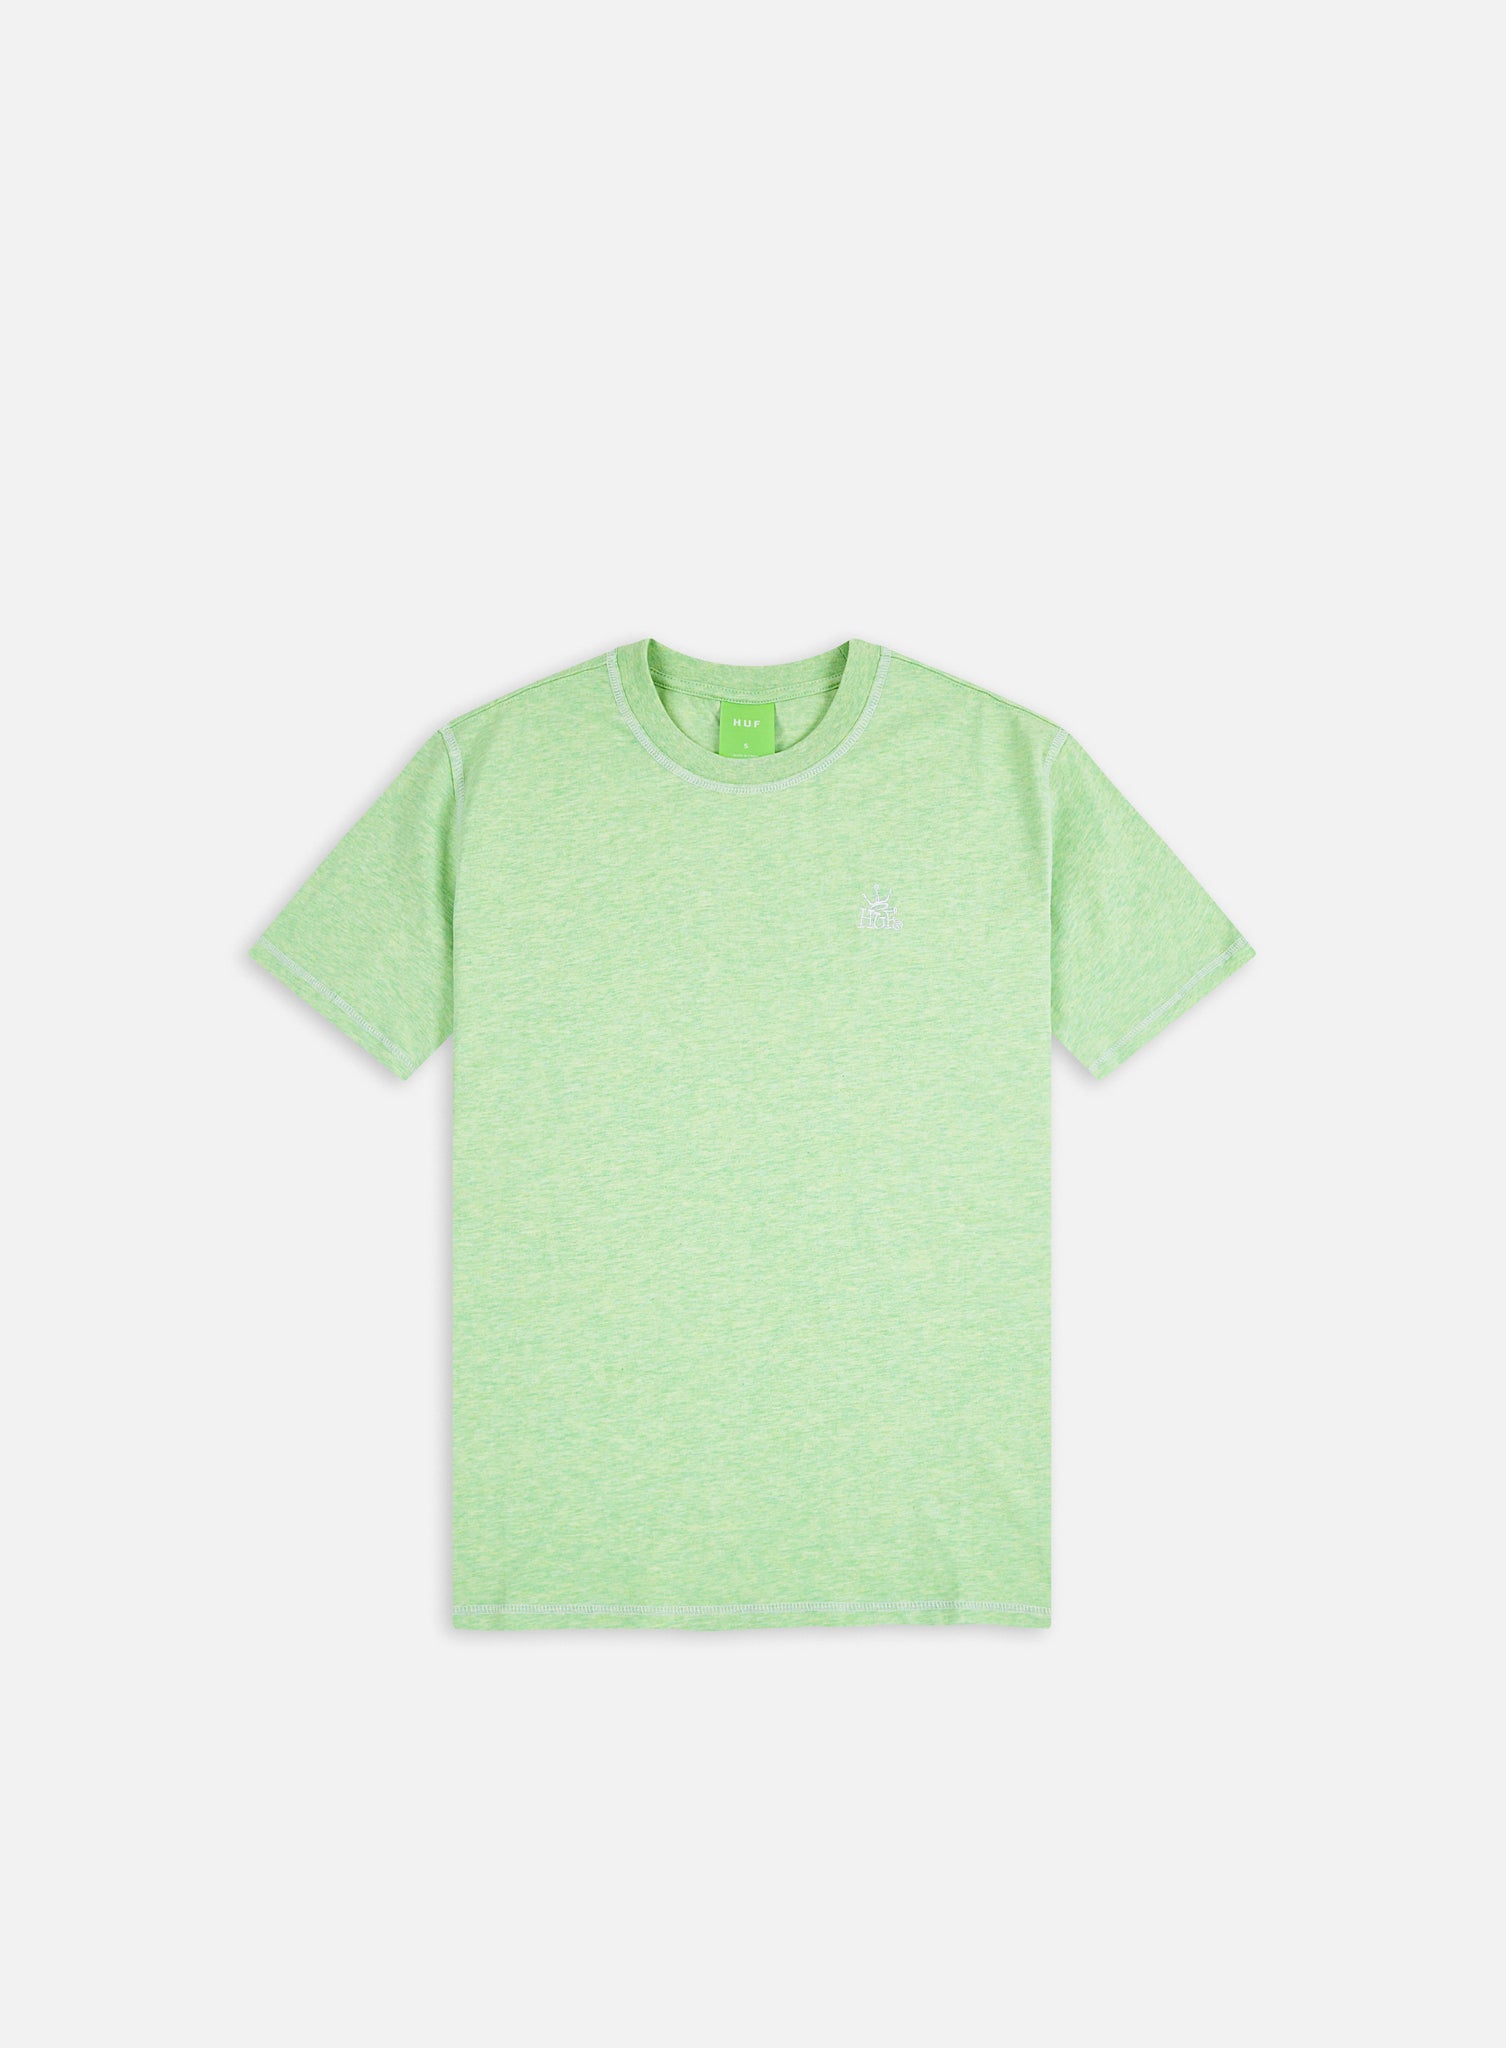 S/S Contrast Crown Relaxed Top (Green Heather)